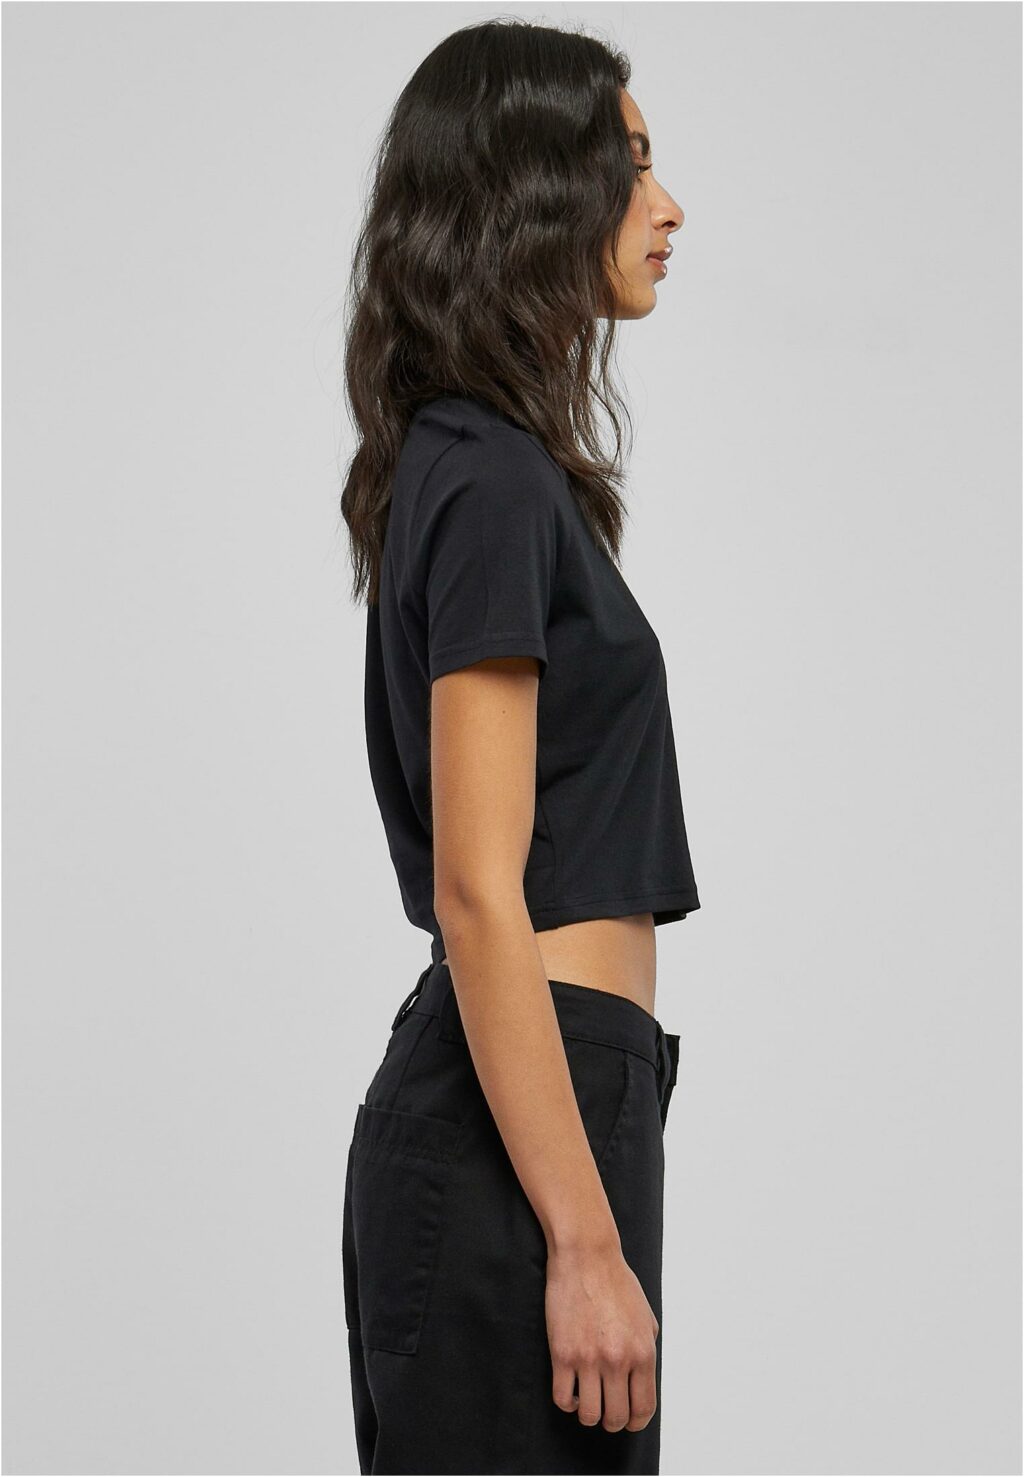 Take It Daisy Cropped Tee black BE067